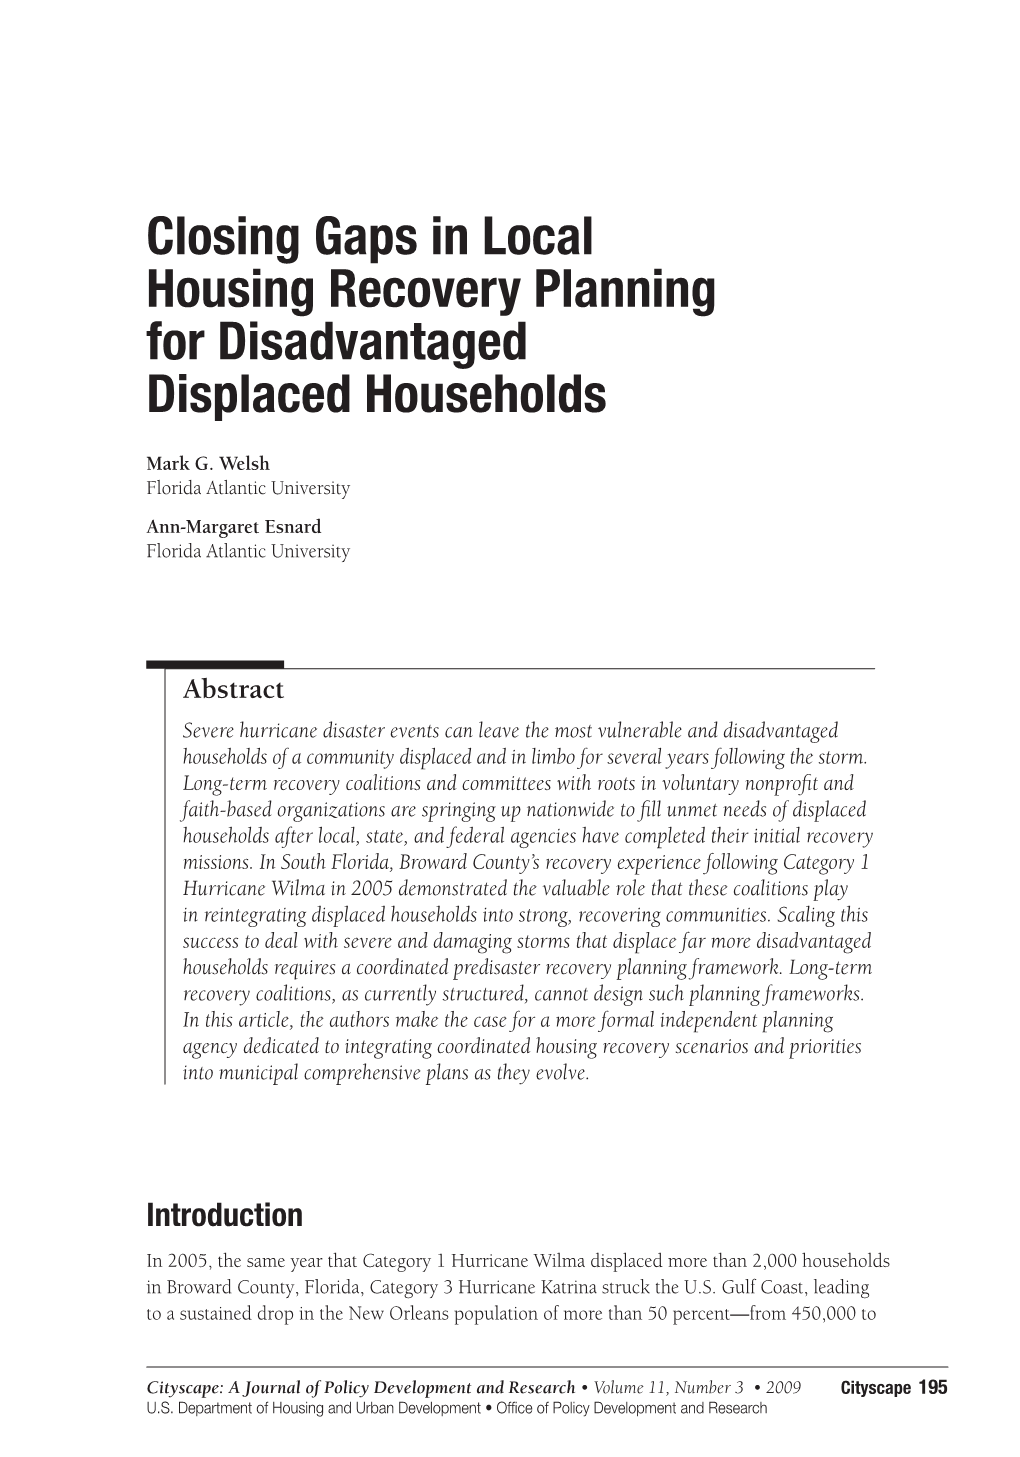 Closing Gaps in Local Housing Recovery Planning for Disadvantaged Displaced Households